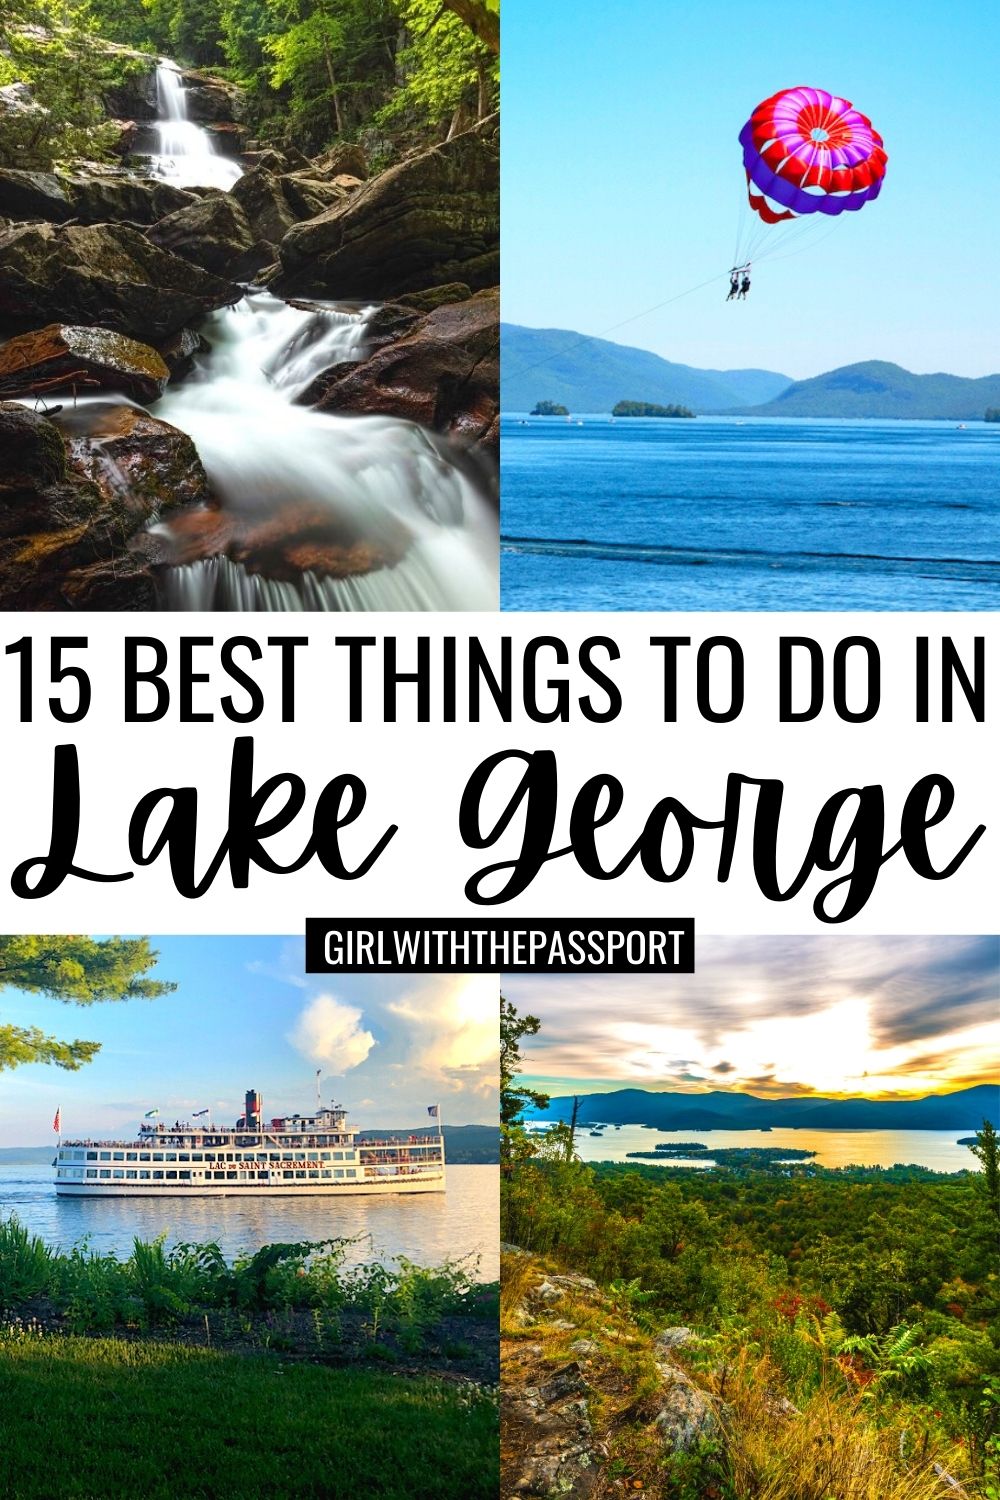 Best Things to do in Lake George NY, Places to Stay in Lake George NY, Where to Eat in Lake George NY Lake George Itinerary, Lake George Attractions, Top Things to do in Lake George, Adirondacks, Best Hikes in the Adirondacks, New York Travel Tips, New York Travel Guide, Lake George itinerary, Upstate New York Weekend Getaways. 